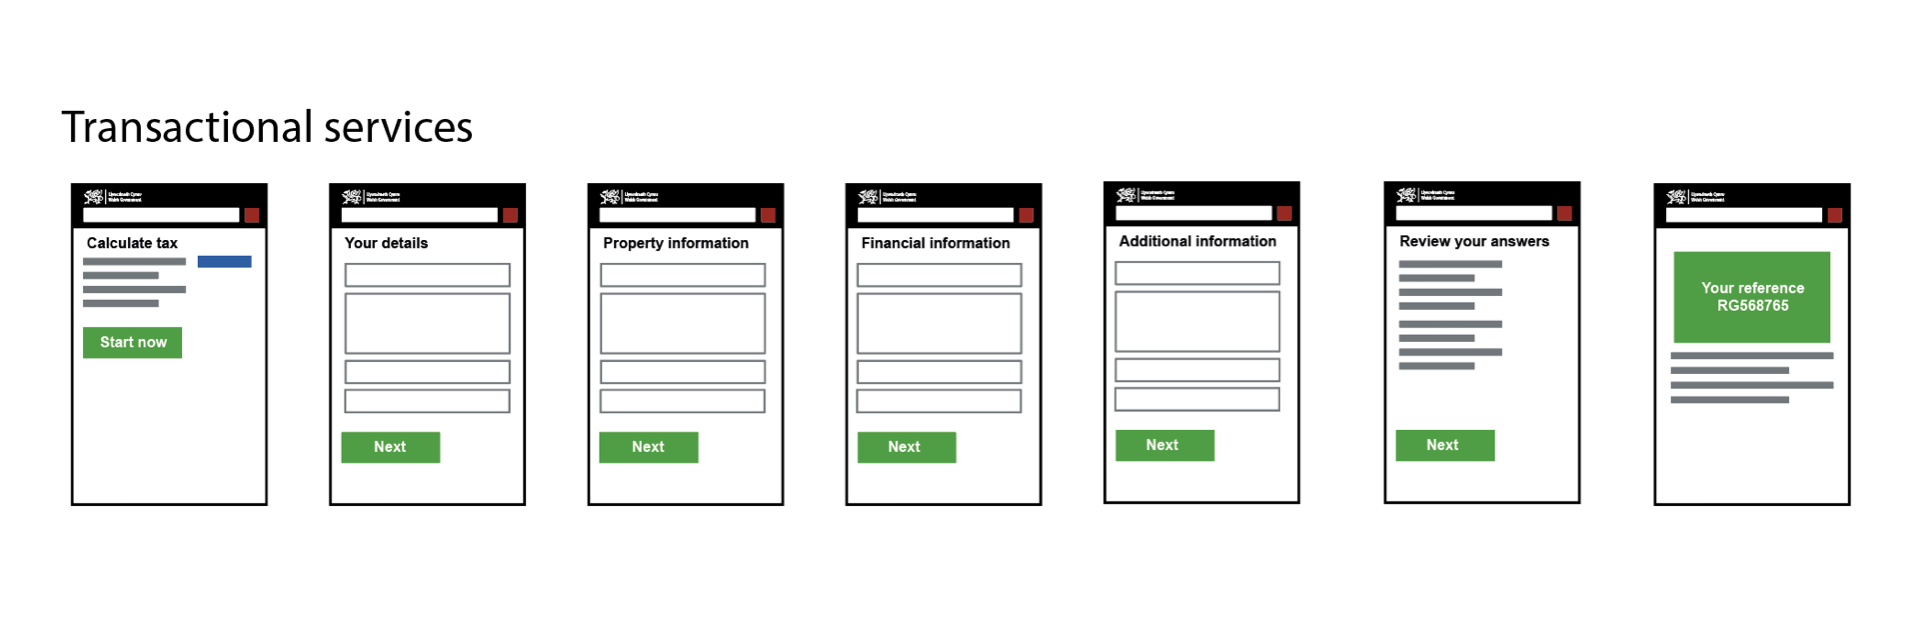 A simplified wireframe of a 7 step, generic government web form, including the option to review answers entered and a reference number on the last page.